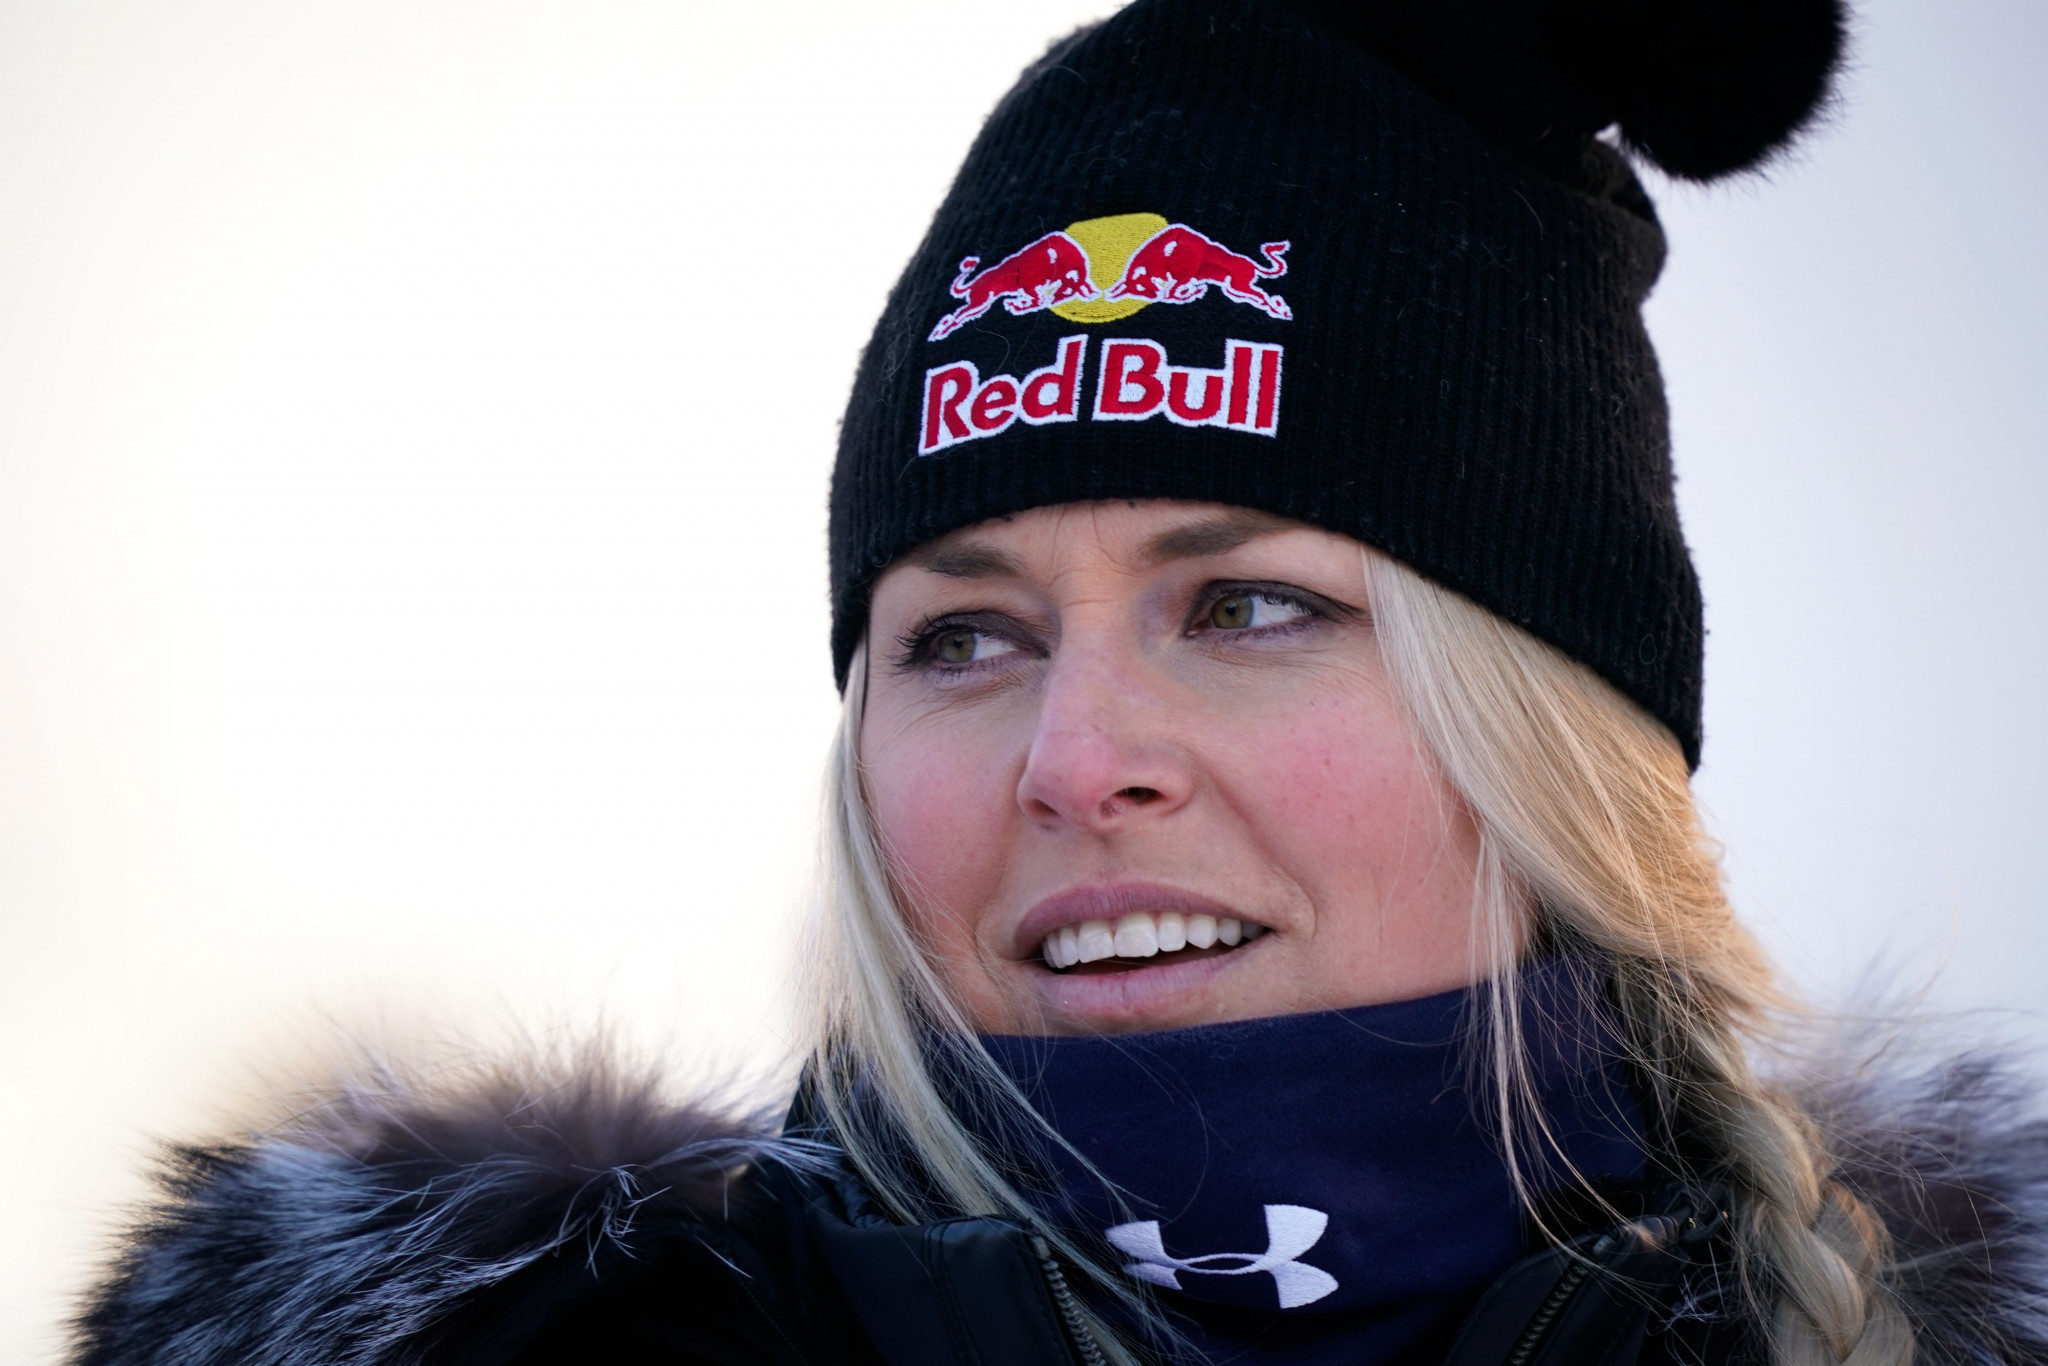 Vonn to compete at last event before retirement at FIS Alpine World Ski Championships in Åre